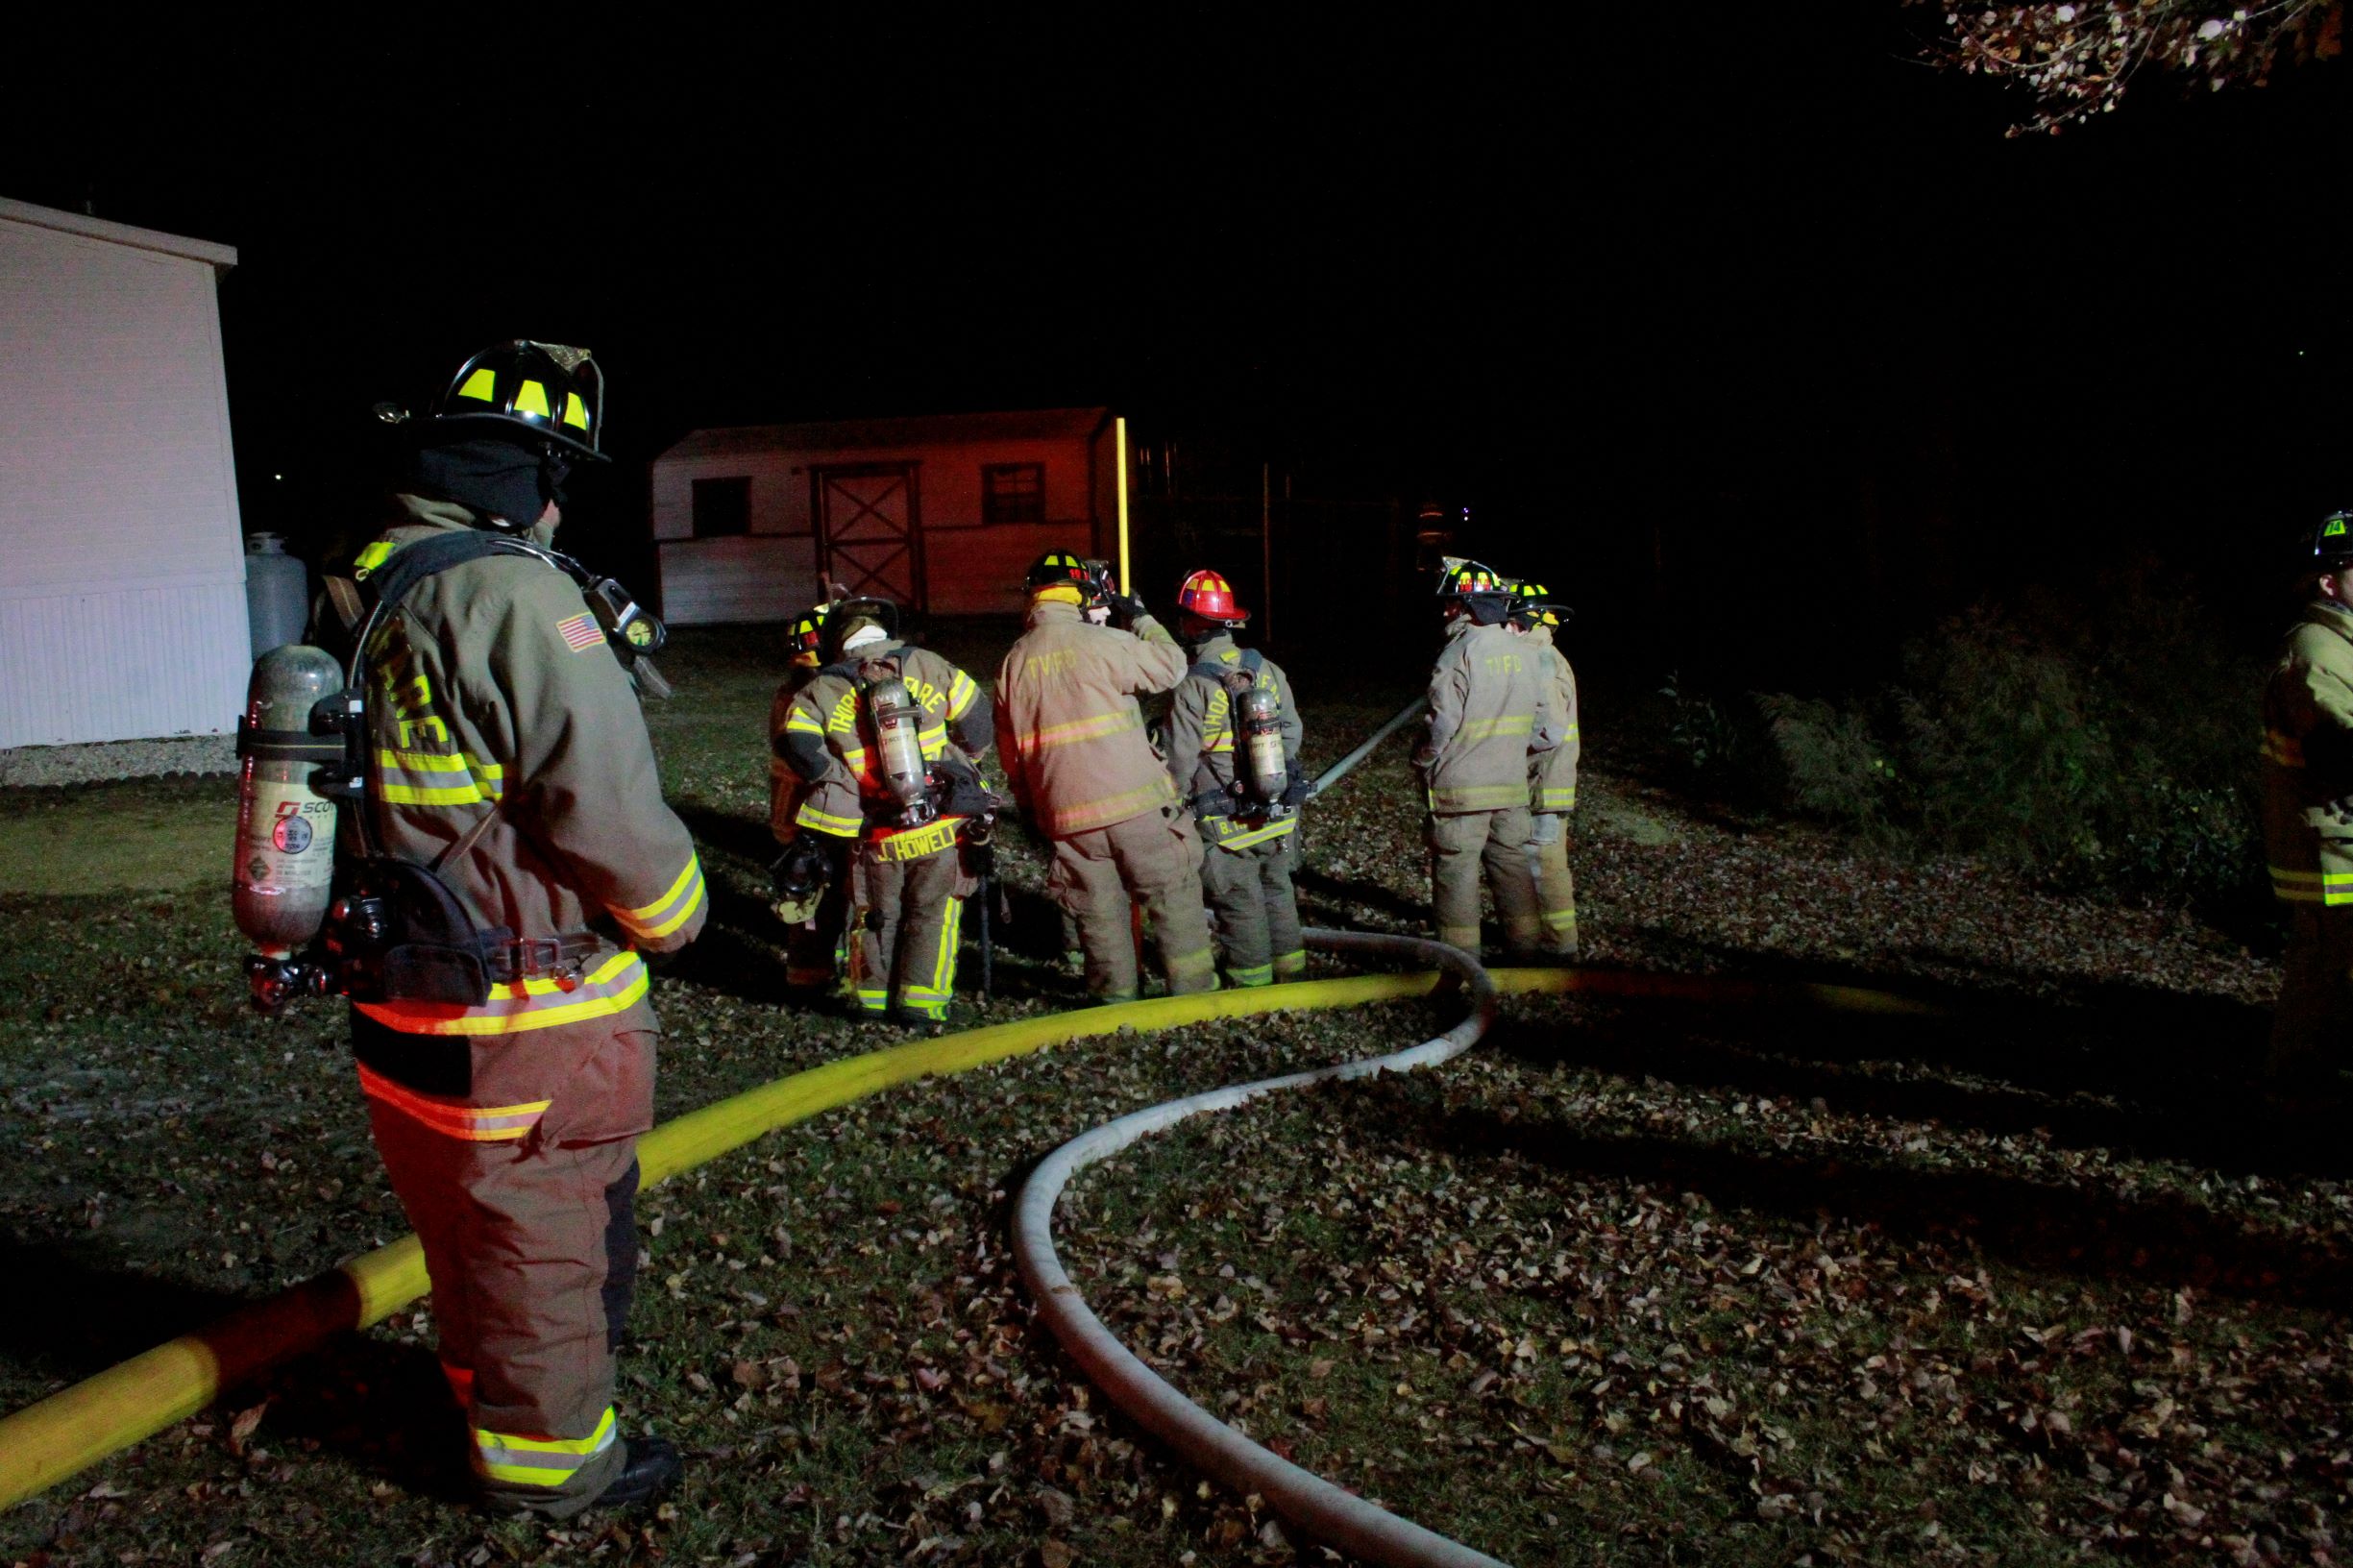 Structure Fire On Graystone Drive (PHOTO GALLERY)